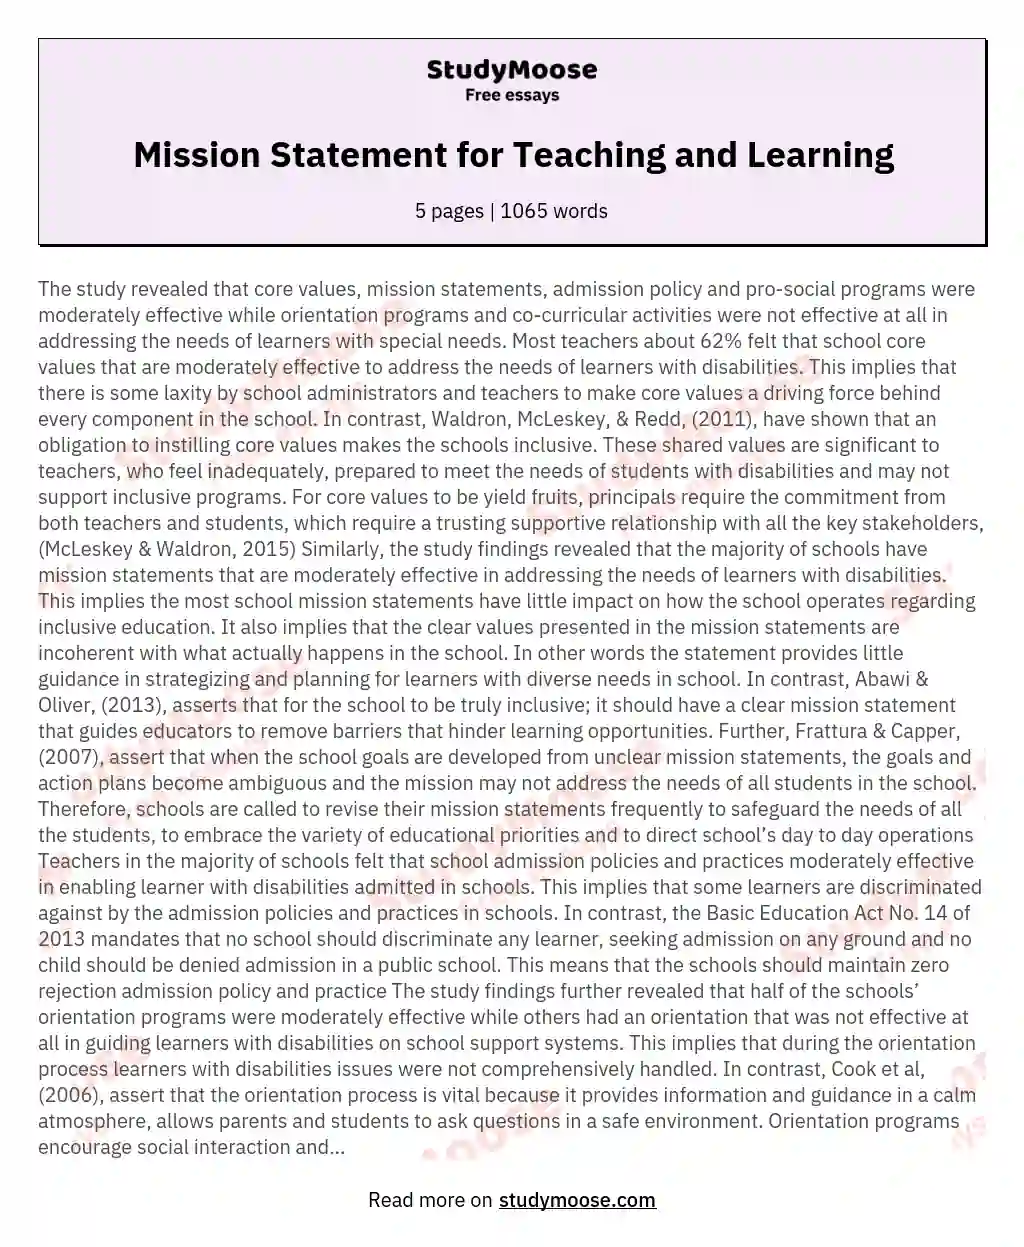 Mission Statement for Teaching and Learning essay